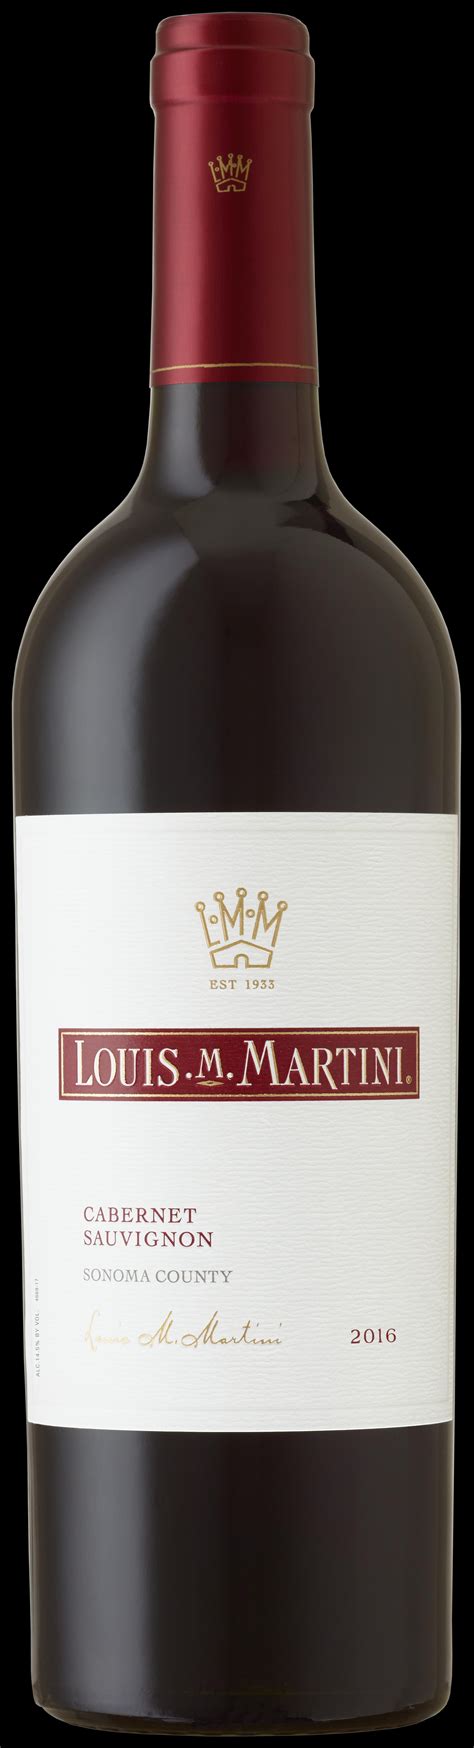 Louis m martini. J7436118. Alcohol %. 16%. Grape. Primitivo-Zinfandel. Unit Volume. 75cl. From one of California's Grand Cru vineyards, it starts with the intense aromas of rich blackberry, blackcurrant and pepper aromas, the palate has striking power and breadth. This leads to a sweep of dark fruit flavours of blackberry, plum, … 